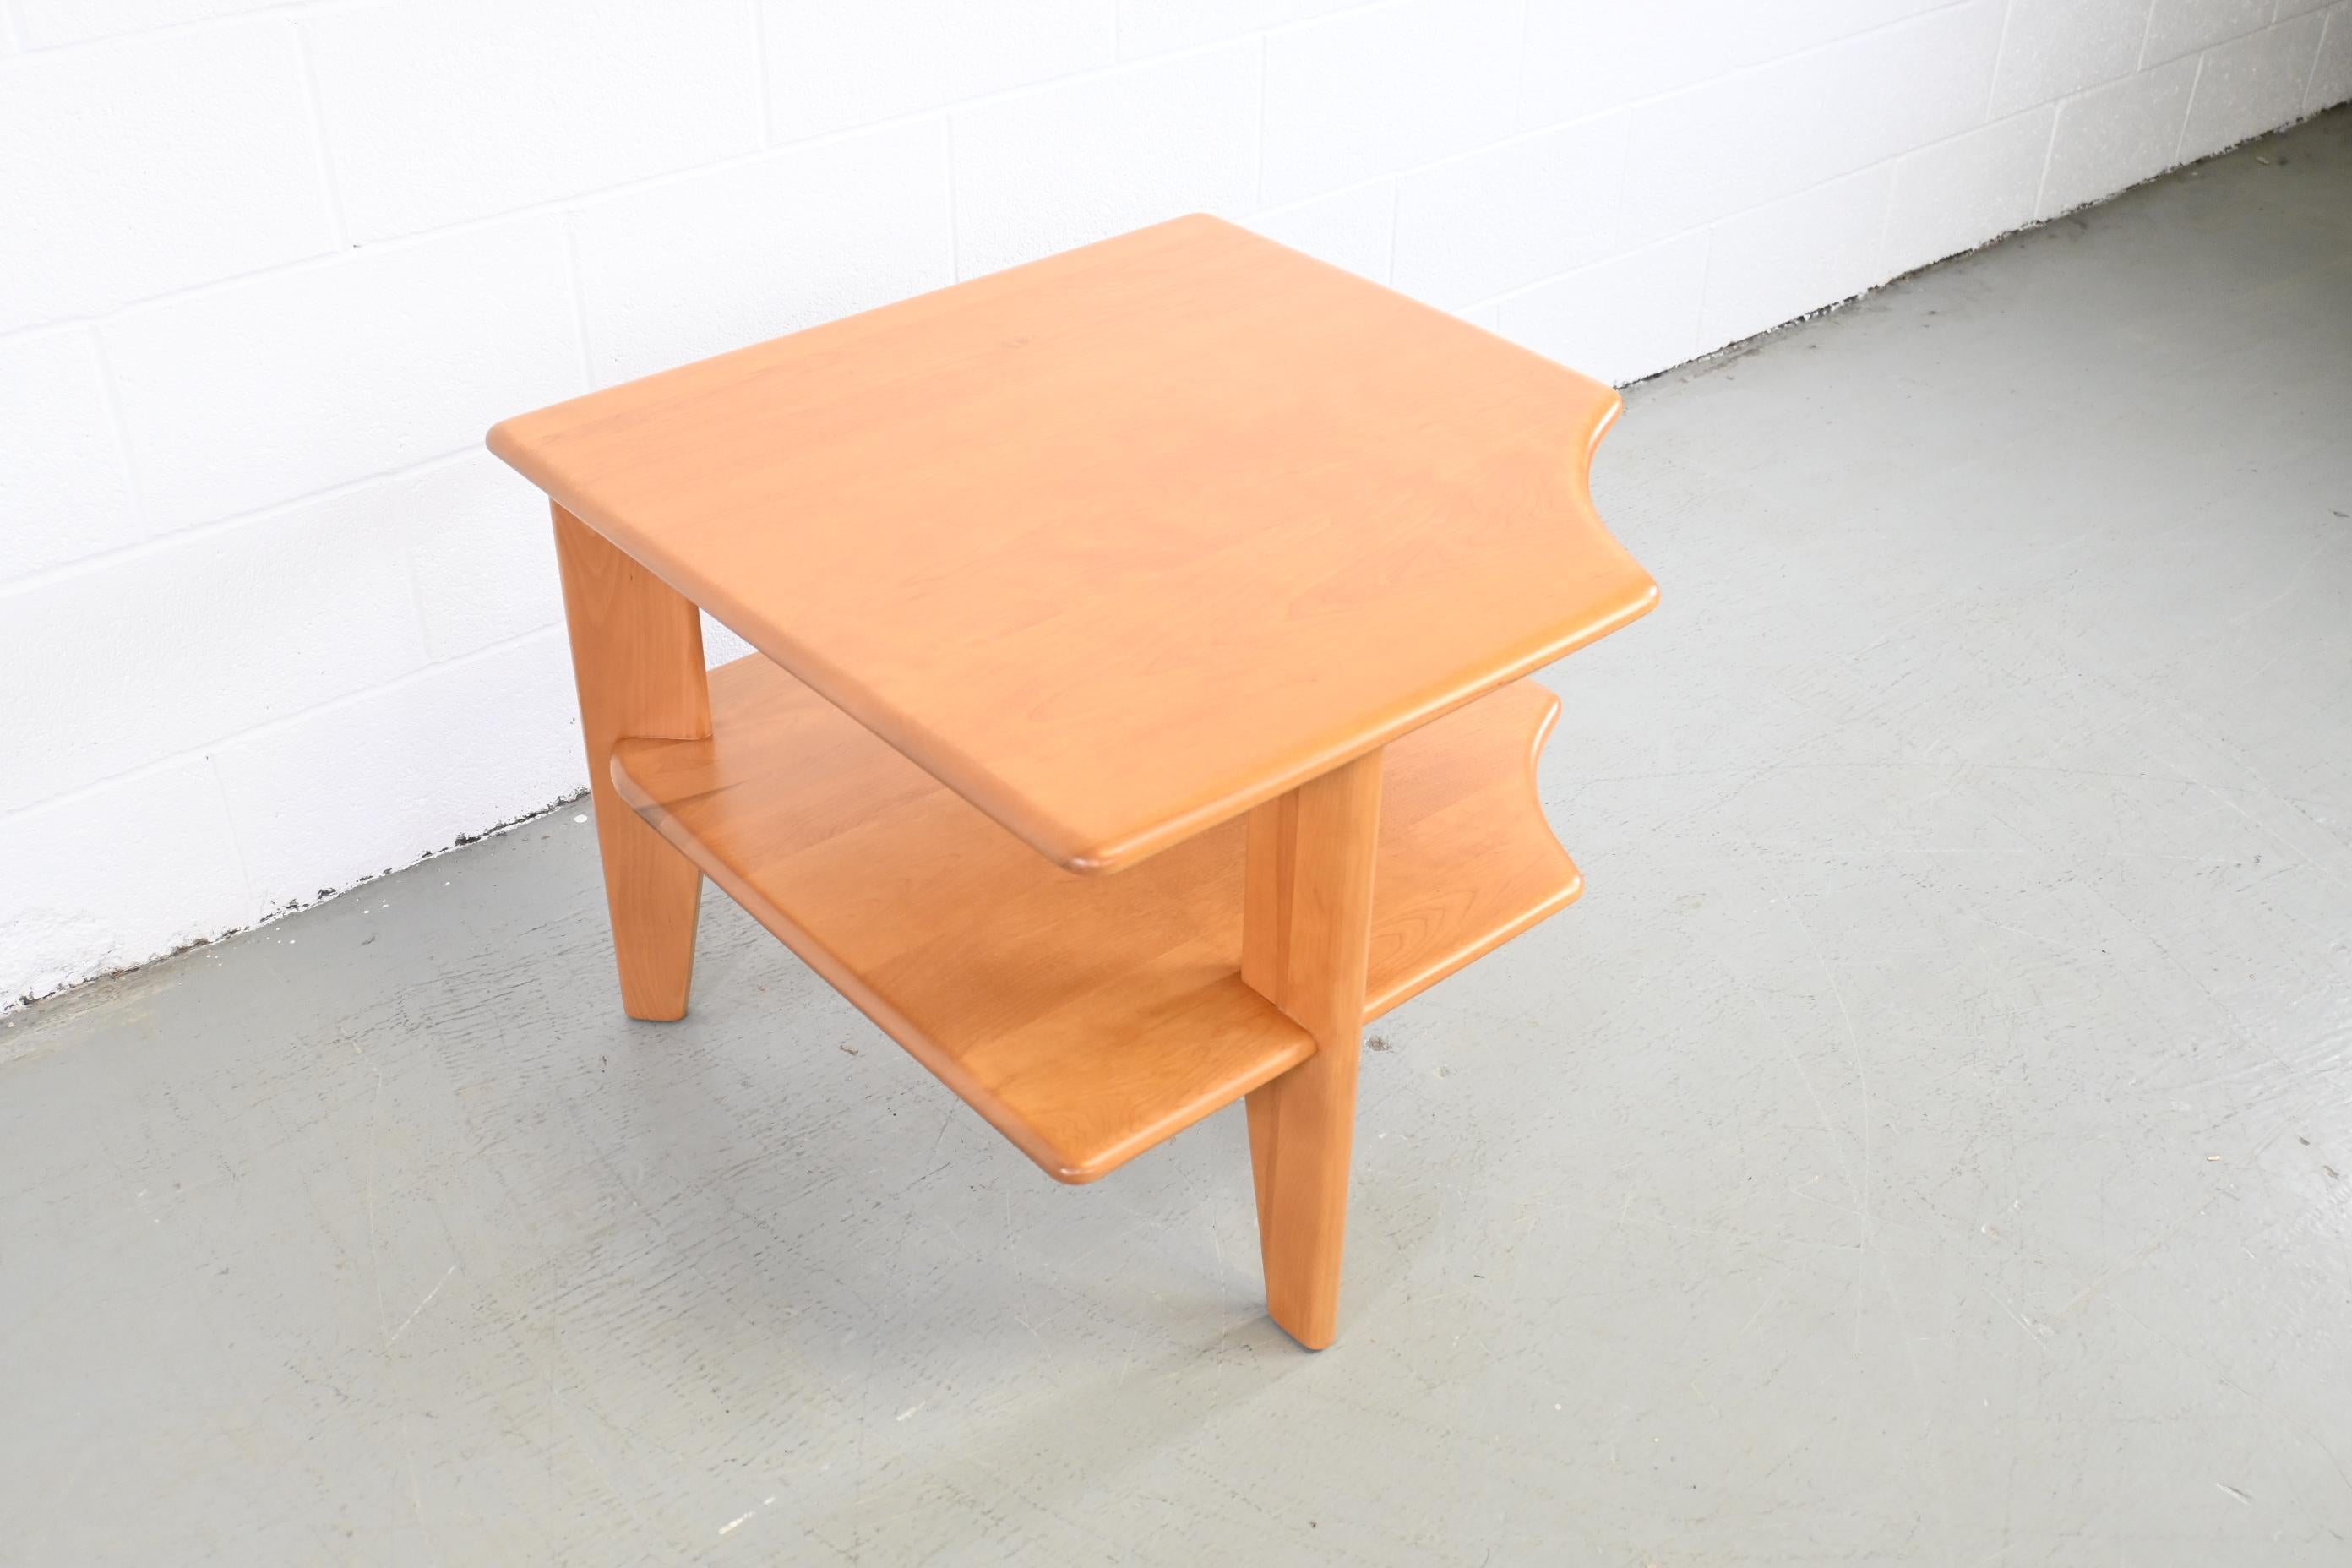 Lacquered Heywood Wakefield Style Mid-Century Modern Birch Corner Table For Sale